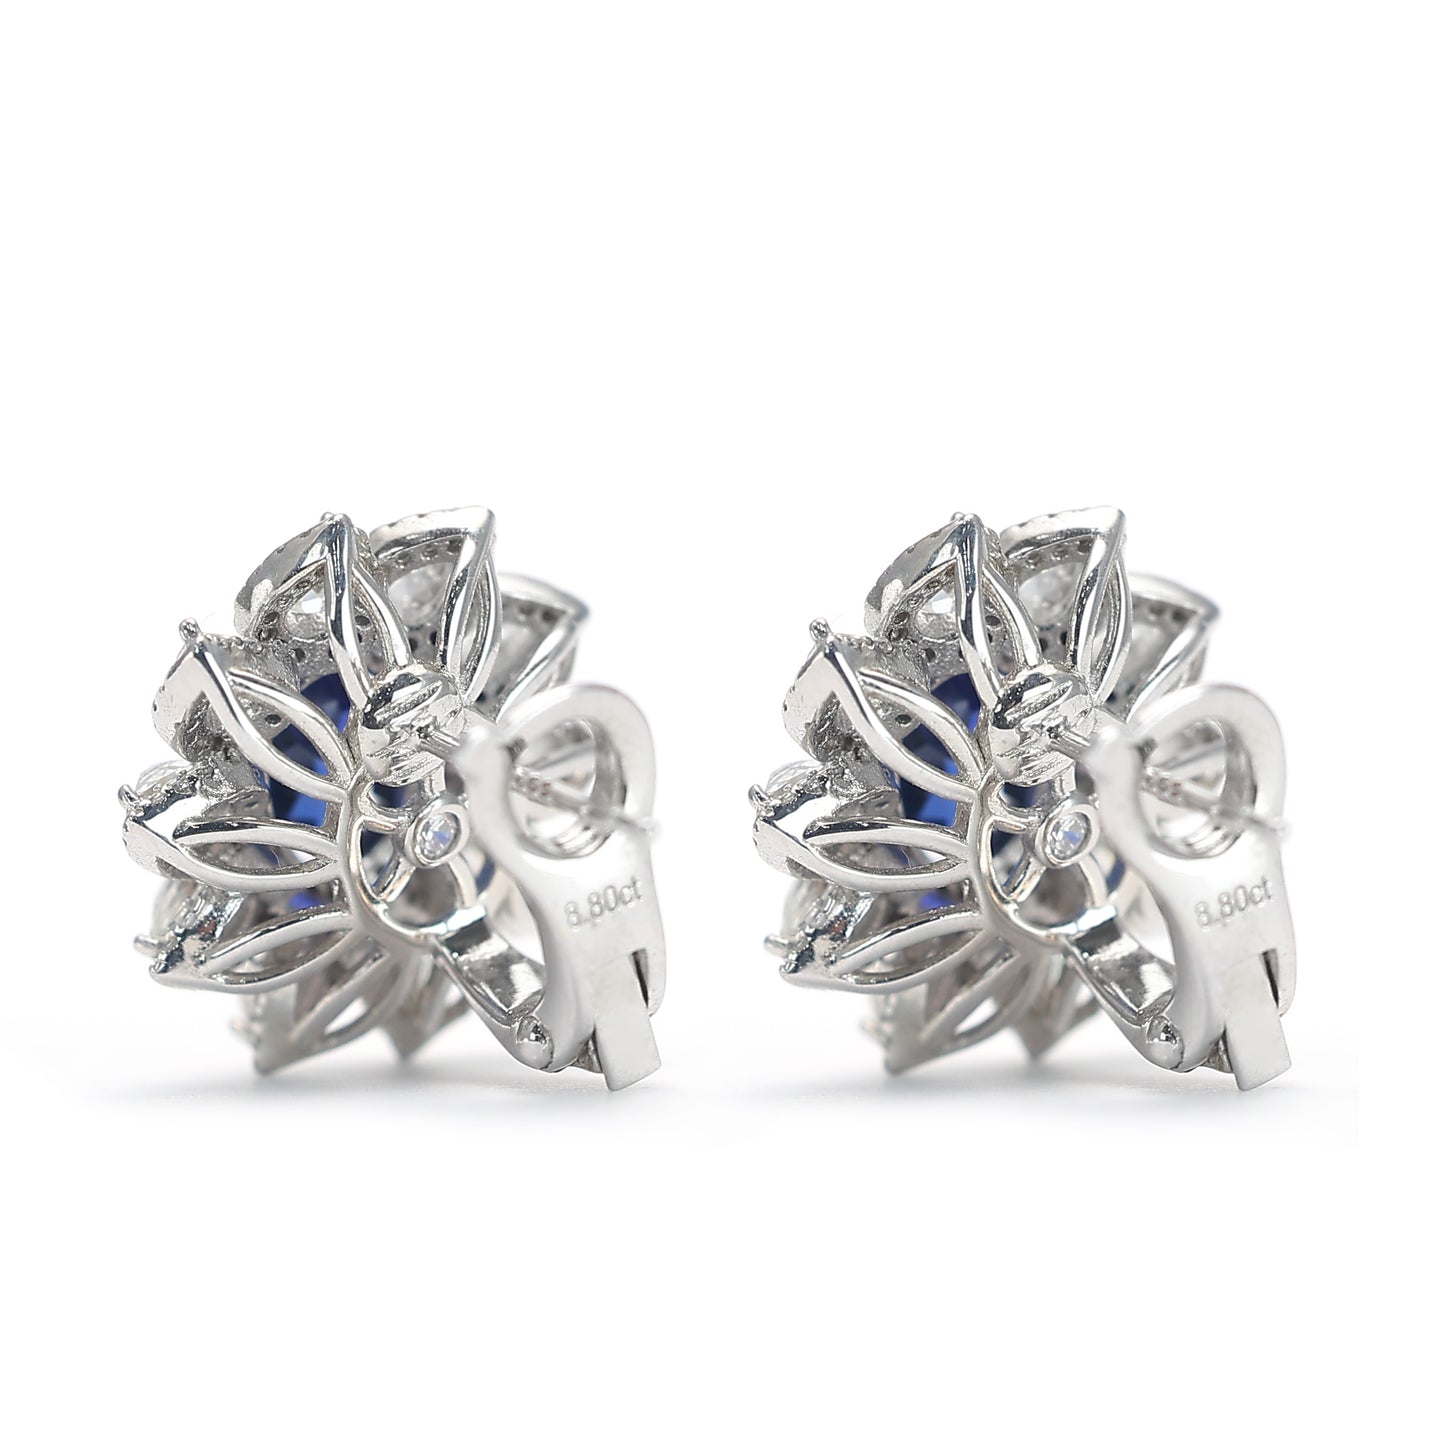 Micro-setting Sapphire color Rose-cutting Lab created stones Apollo earrings, sterling silver.